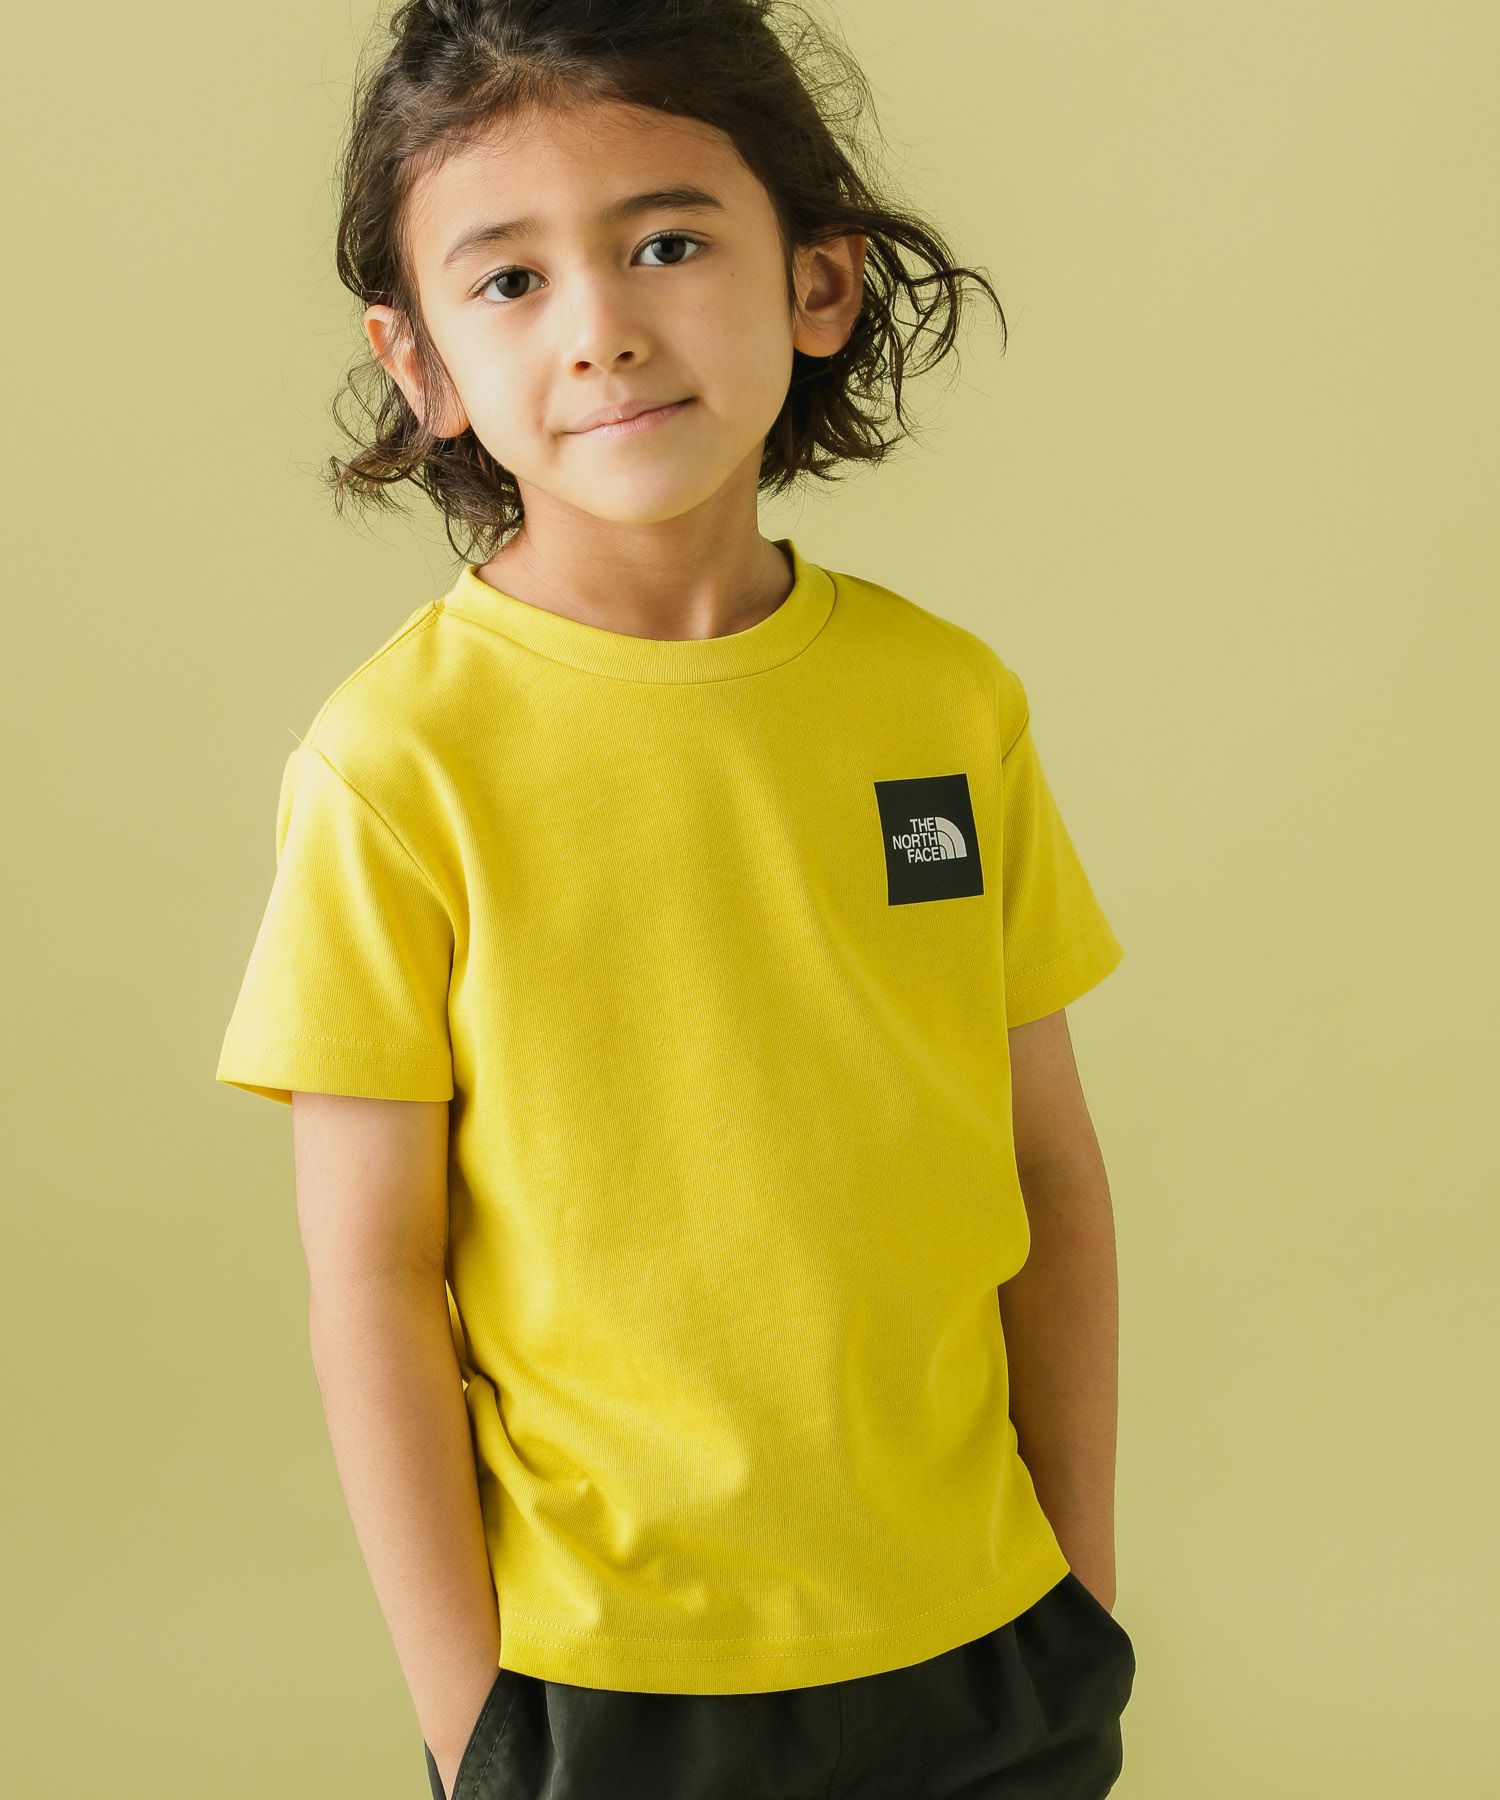 Tシャツ/カットソーTHE NORTH　FACE　KIDS　カットソー　140㎝　ブラック